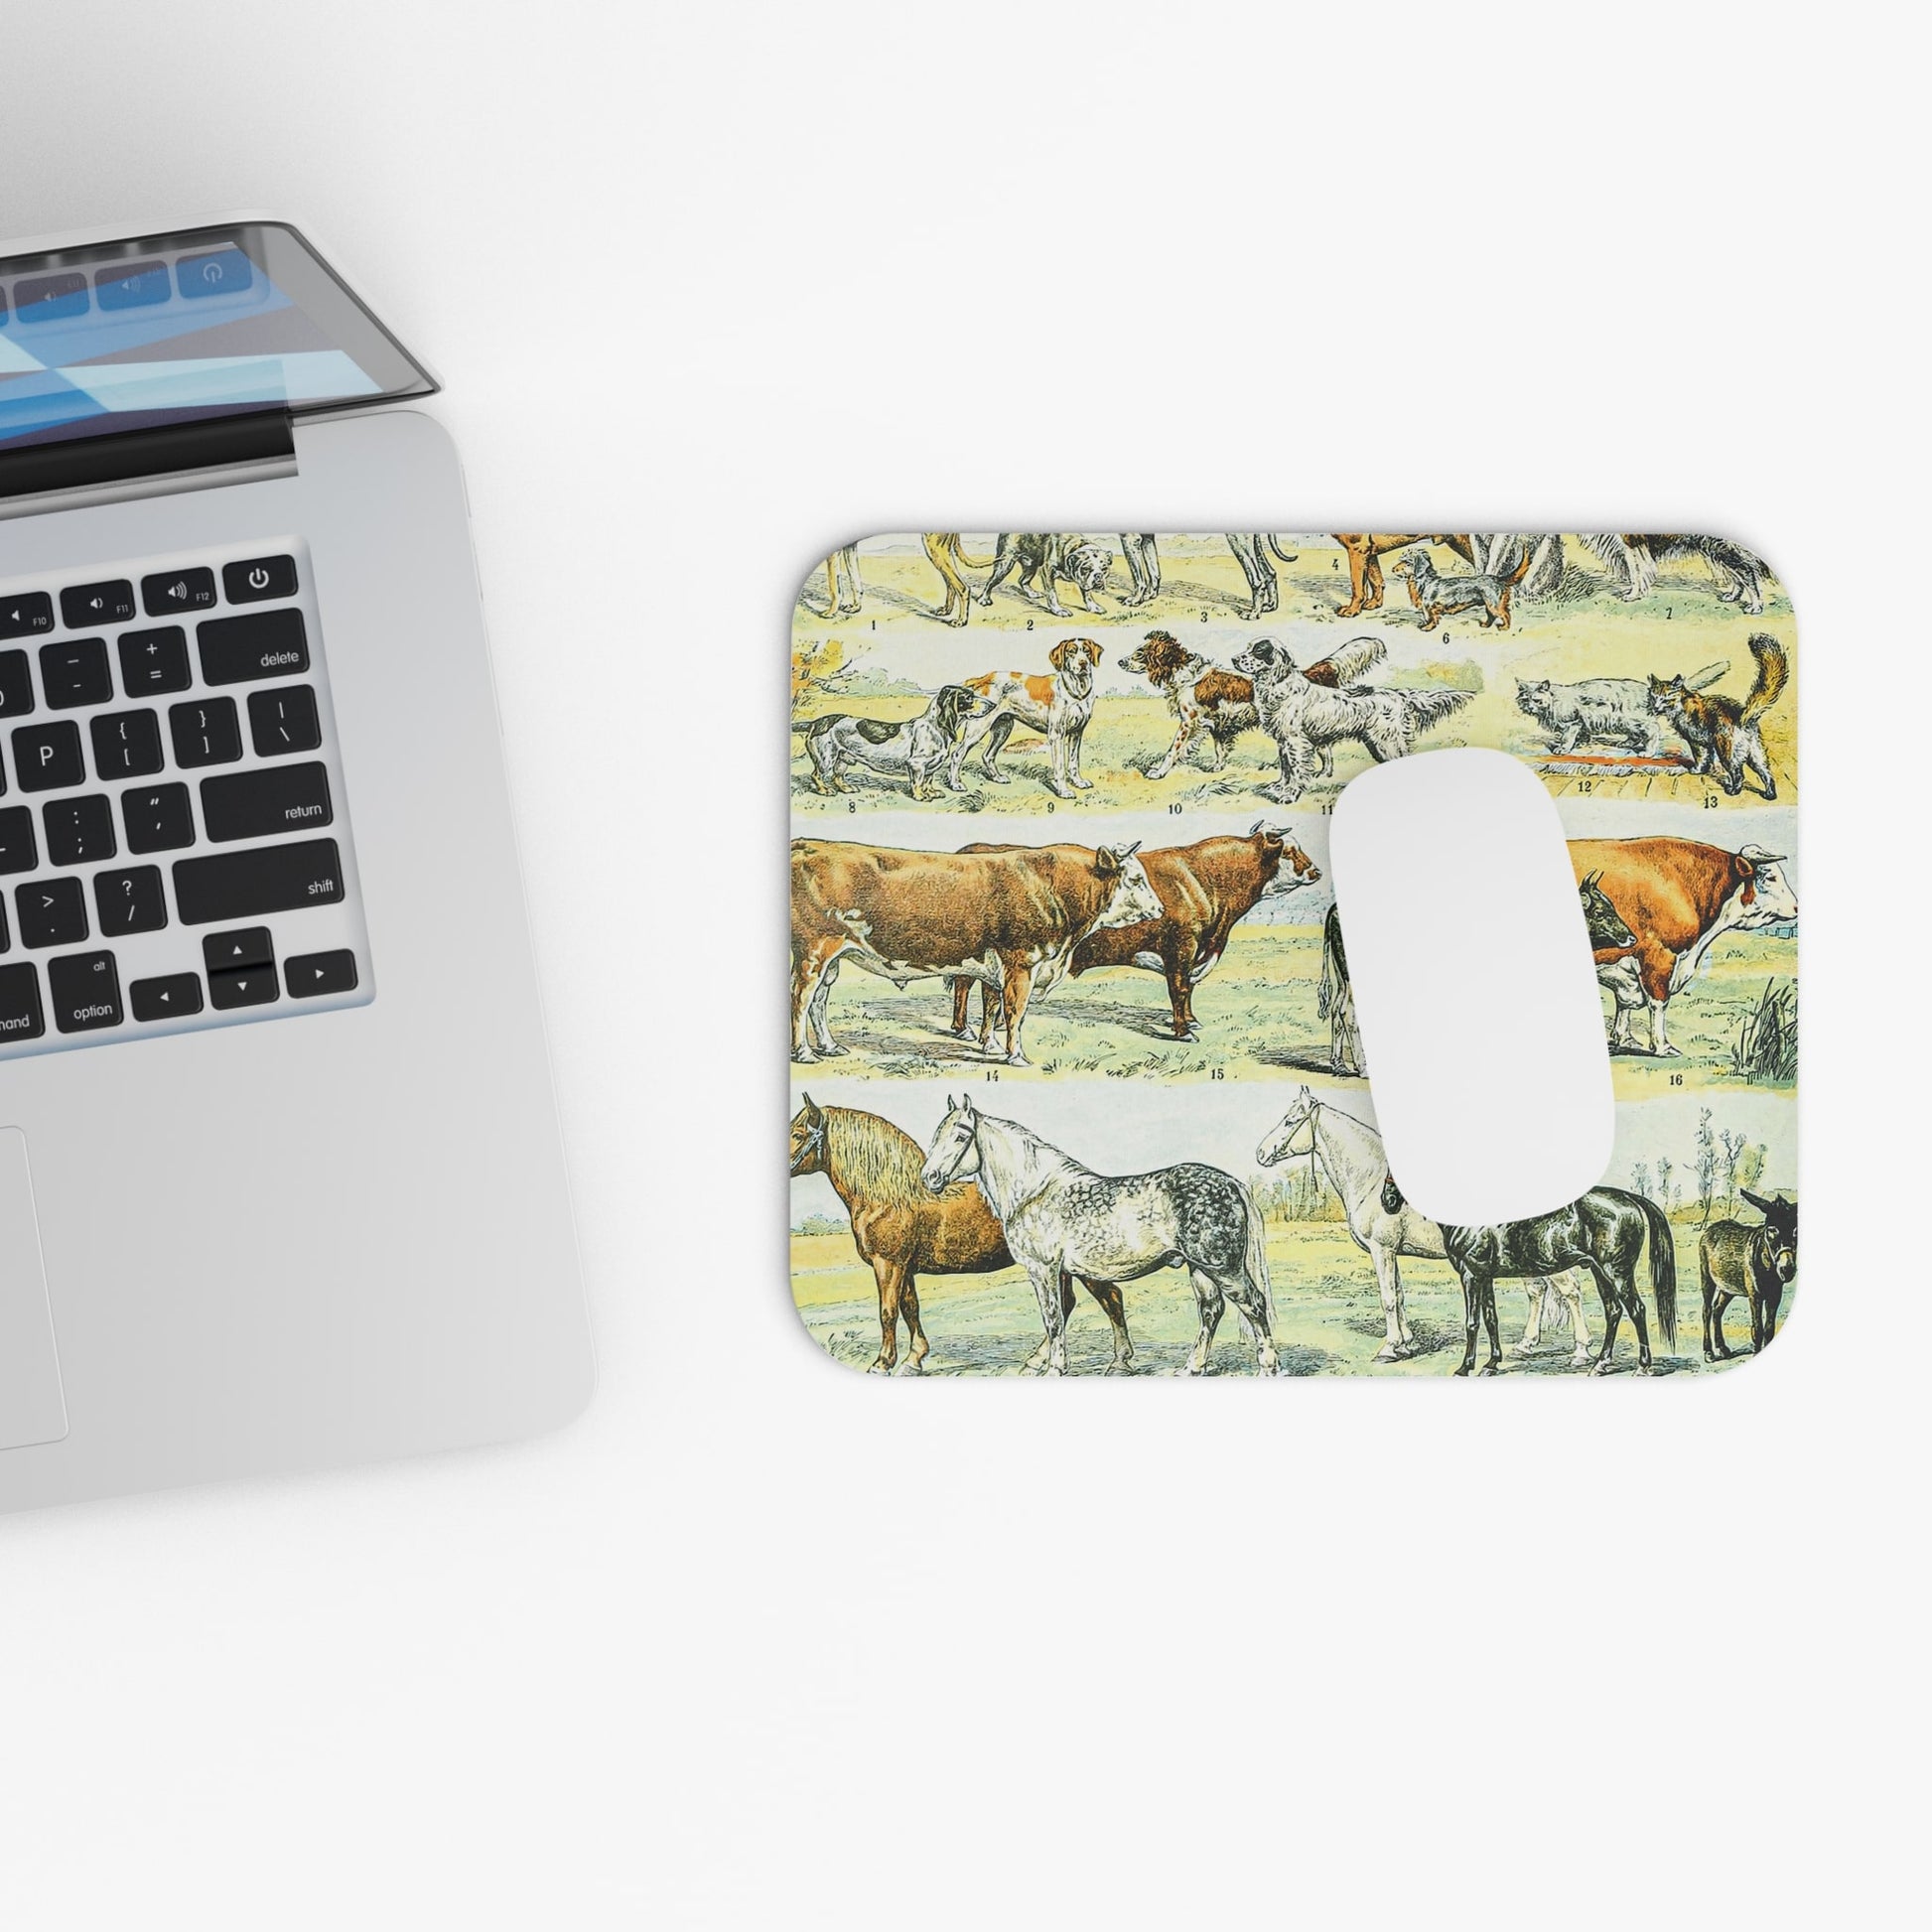 Vintage Wild Animals Design Laptop Mouse Pad with White Mouse